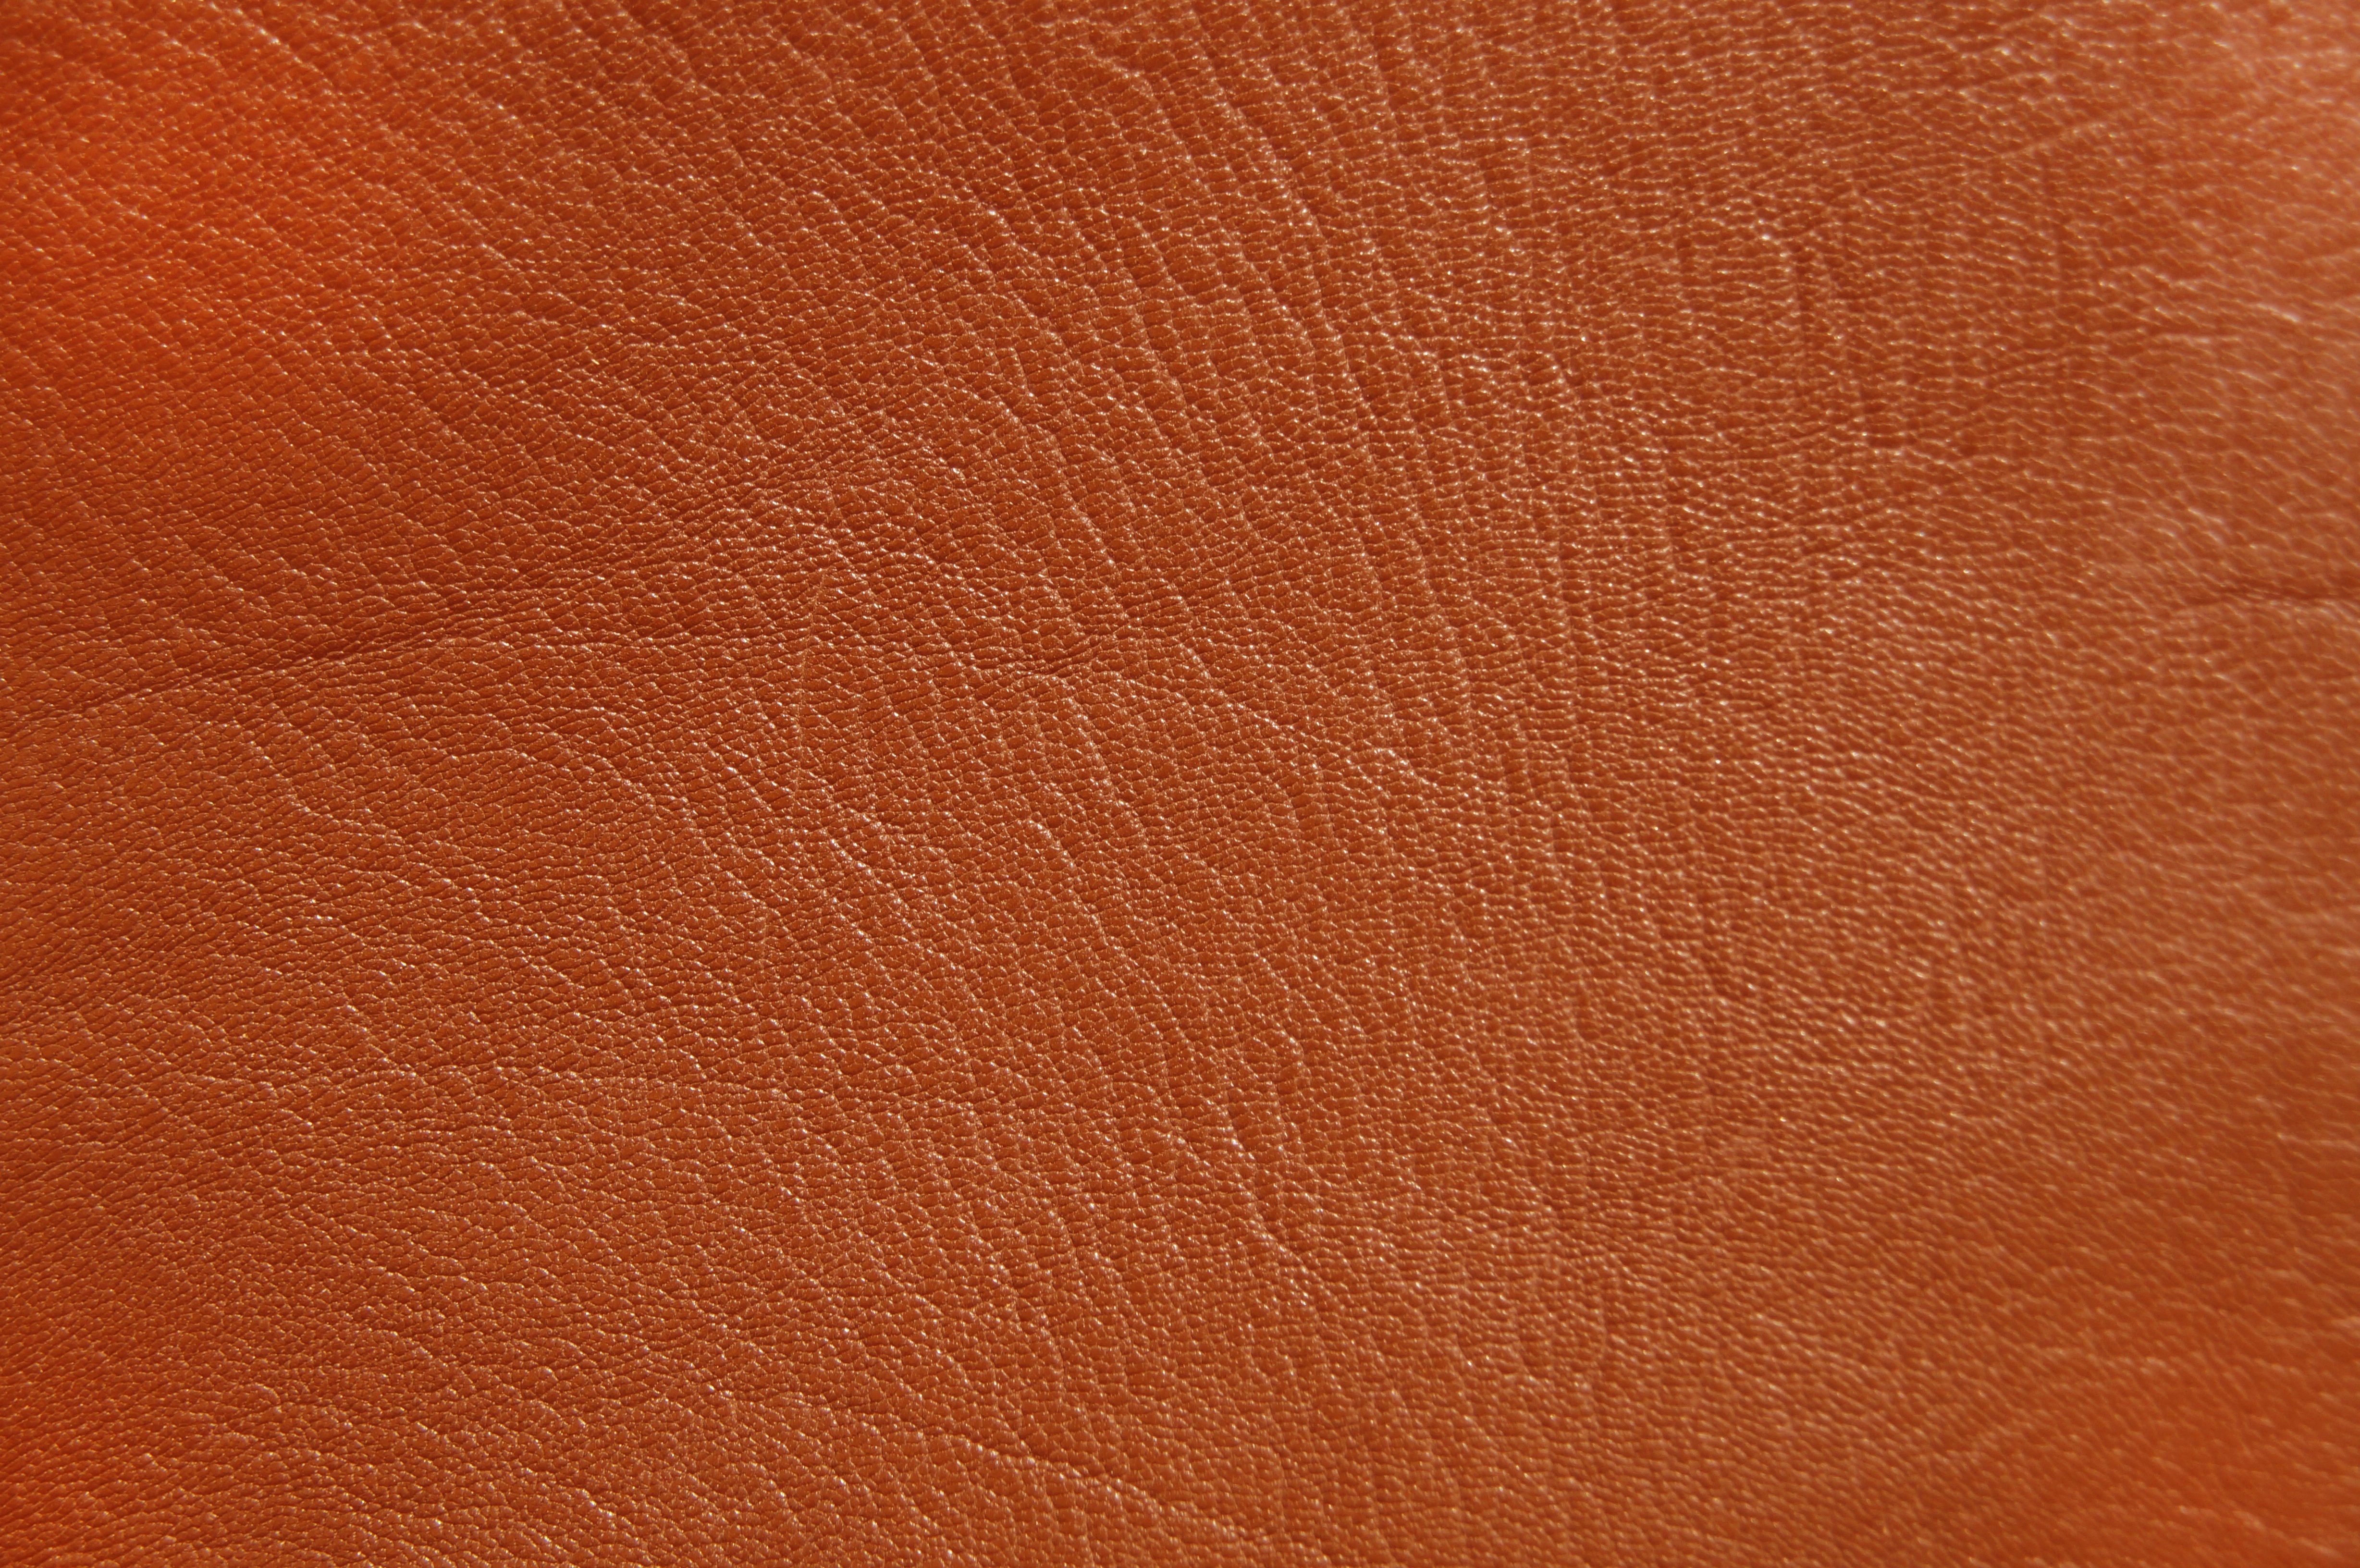 brown leather texture spotted high resolution stock photo wallpaper grunge  stained  Texture X